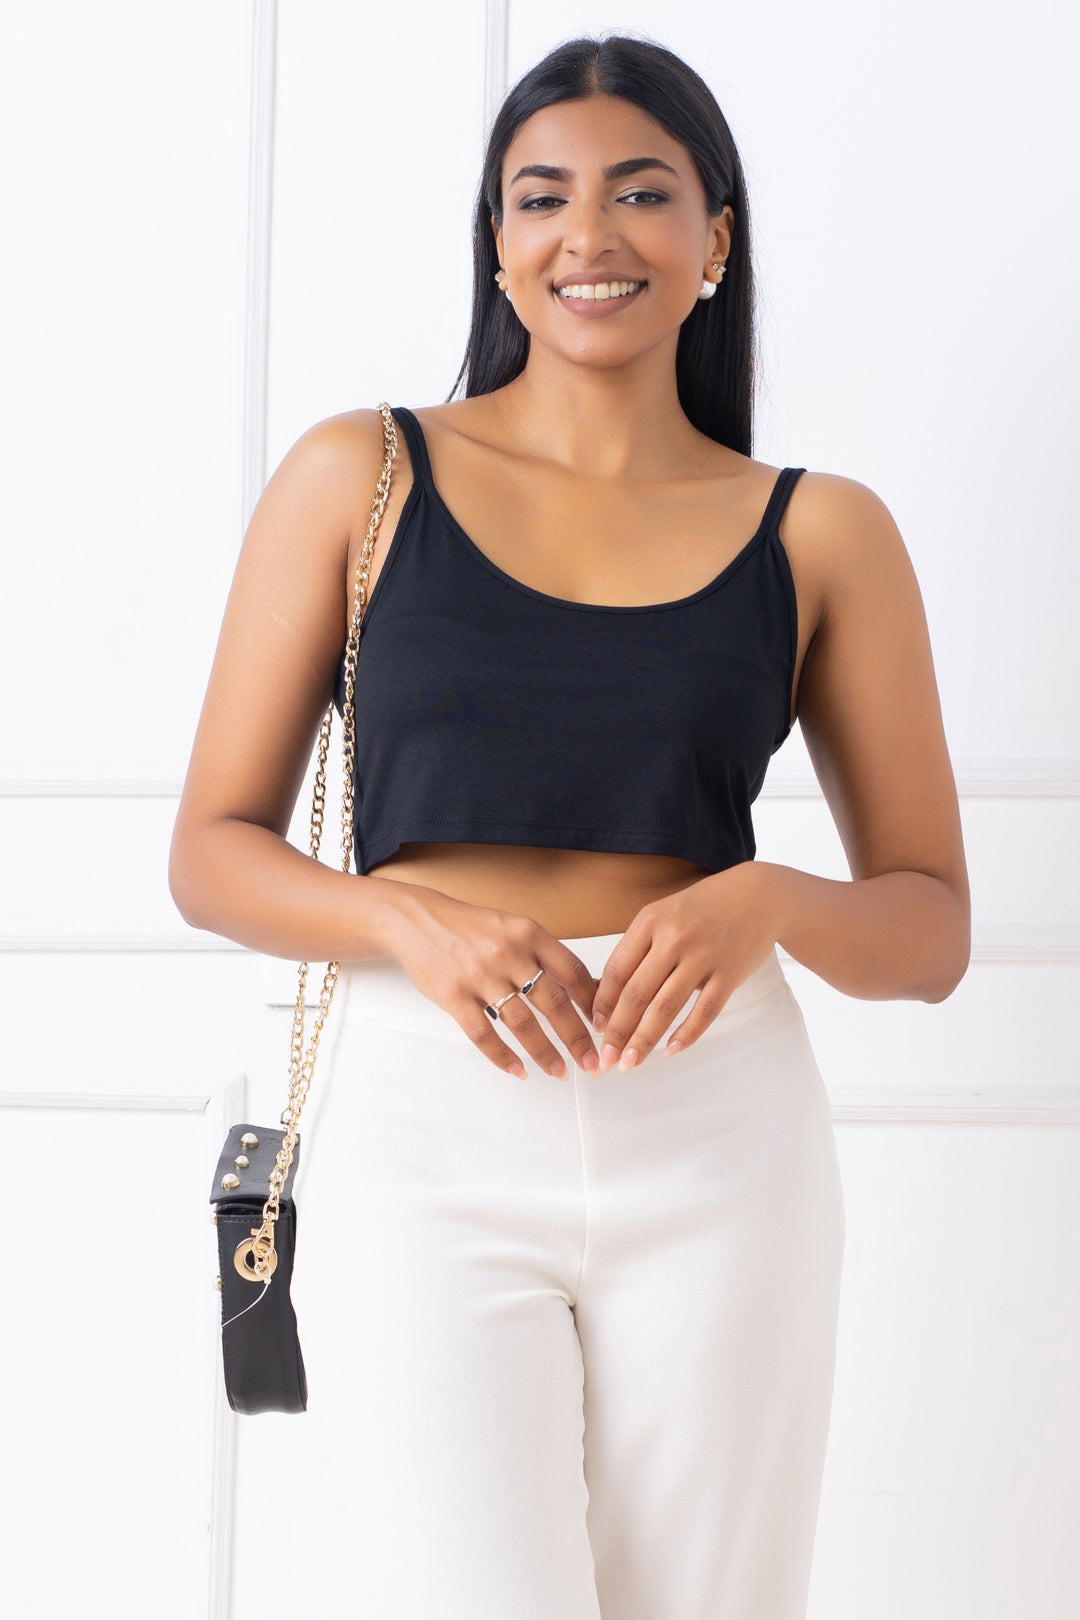 Black Cropped Skinny Top - Slim Fit, Top, Crop Top, Evening Top, Holiday, Holiday Tops, New Arrivals, Slim Fit, Smart Casual, Smart Casual Top, Strappy, T-Shirt, tshirt - MONDY, Sri Lankan wo